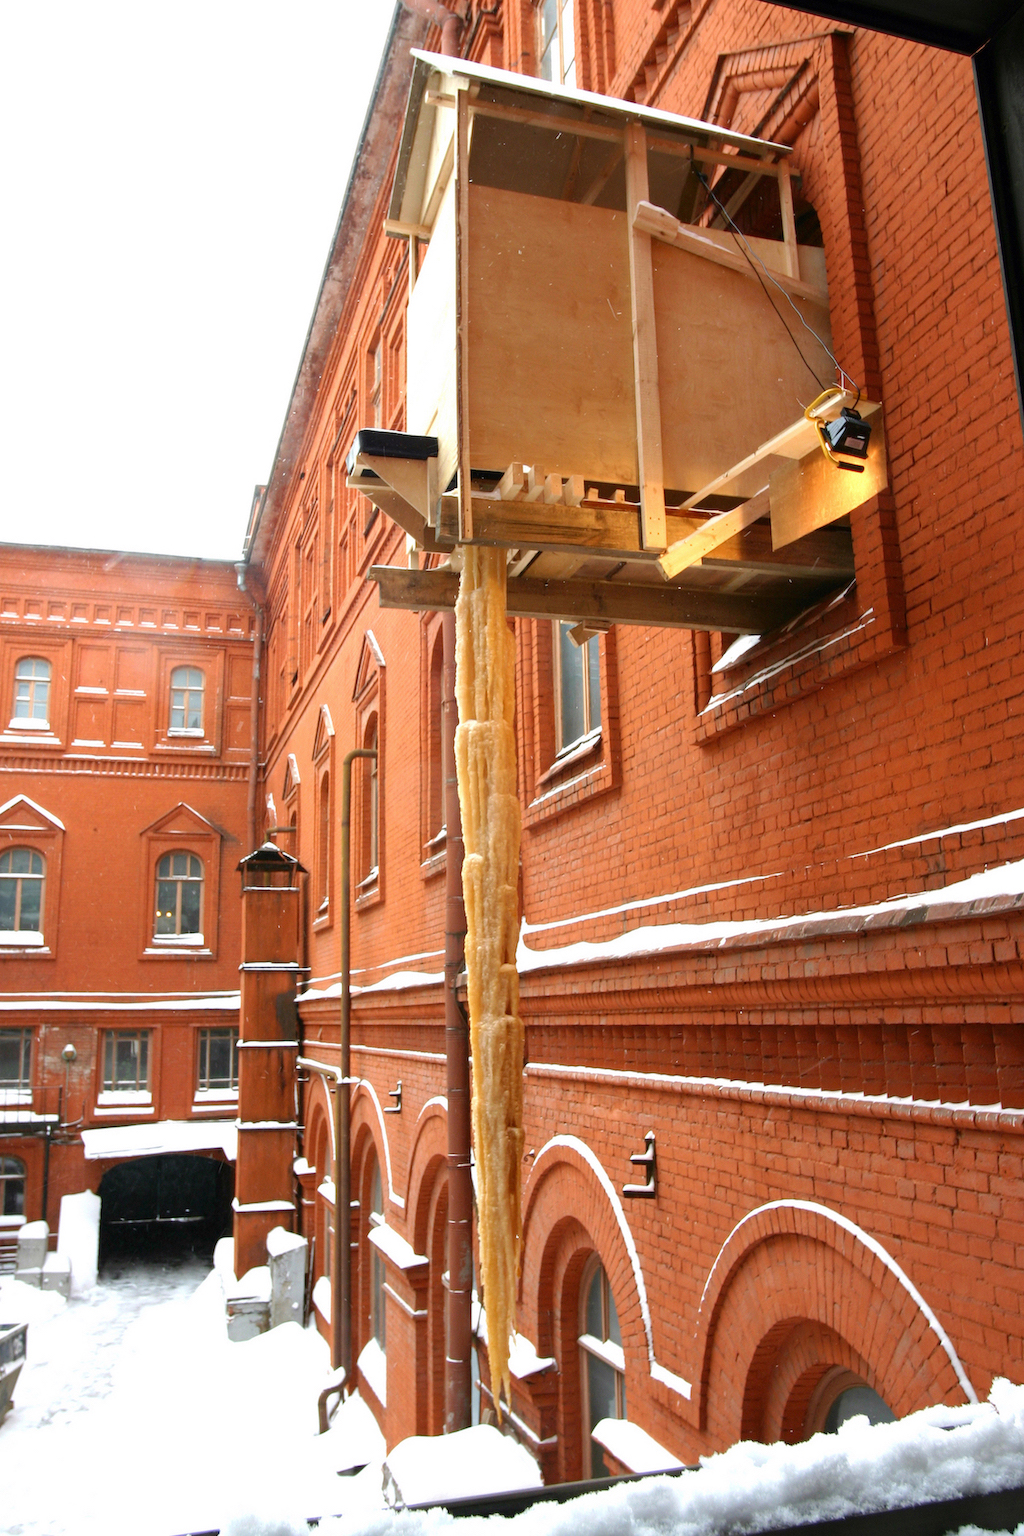 Gelatin, ''Zapf de Pipi,'' 2005 Installation: wooden structure, toilet and ice sculpture (water, metabolic waste, salt and organic matter). Ice sculpture: approx. 7 m x 1 m. Installation view of ''Dialectics of Hope'' at the Lenin Museum, 1st Moscow Biennale of Contemporary Art, Russia, 2005. Photo: © Moscow Biennale